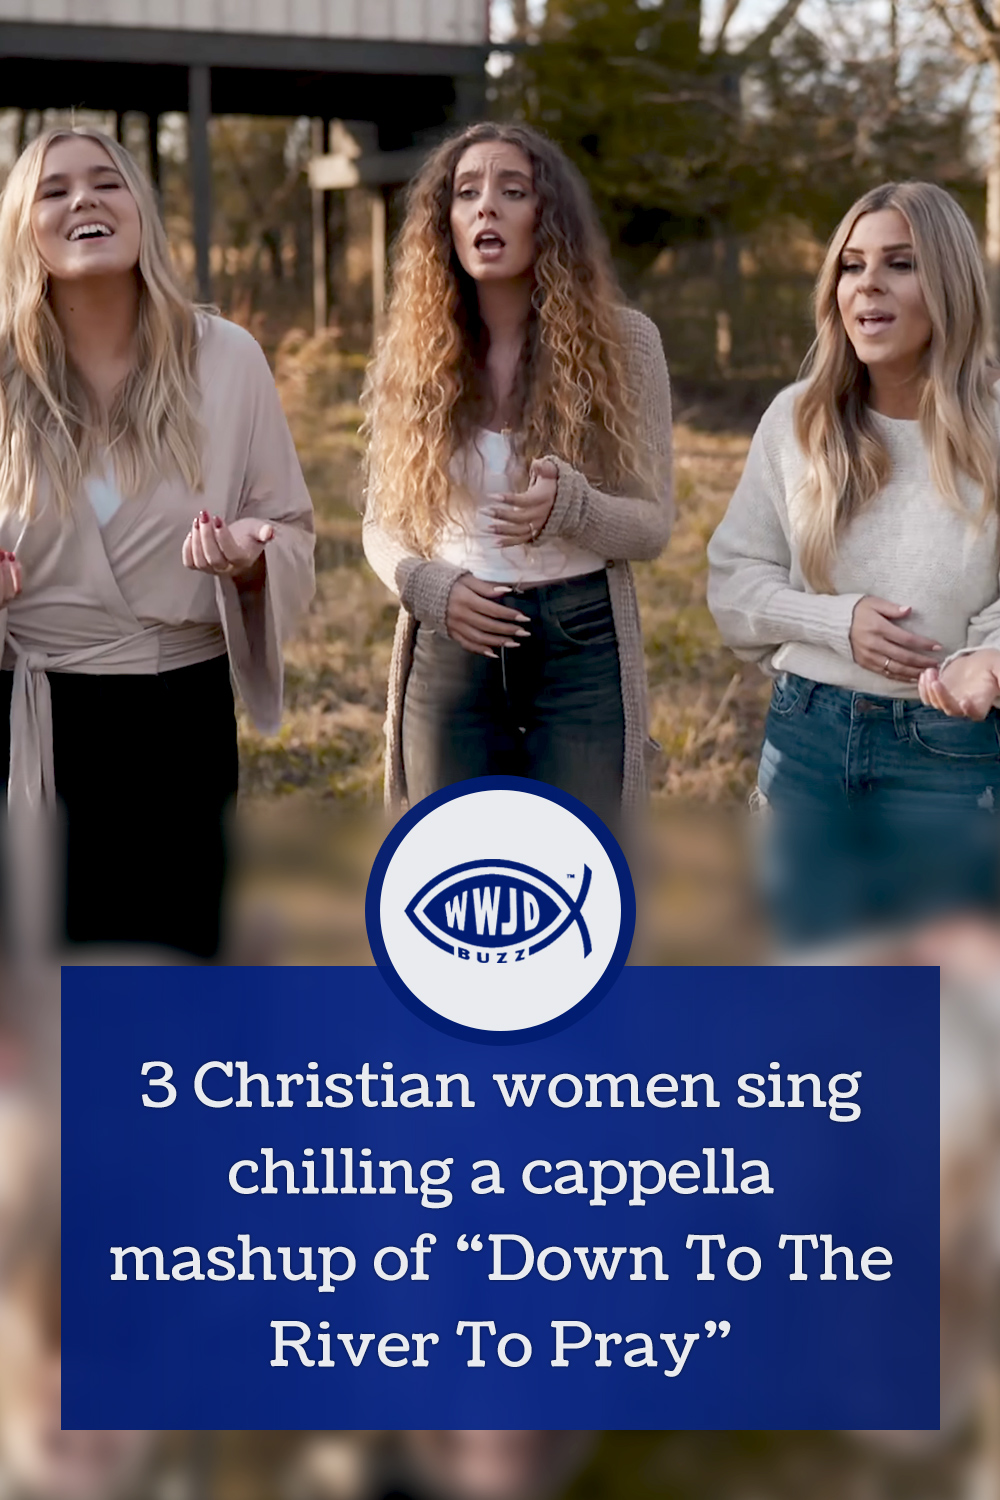 3 Christian women sing chilling a cappella mashup of “Down To The River To Pray”